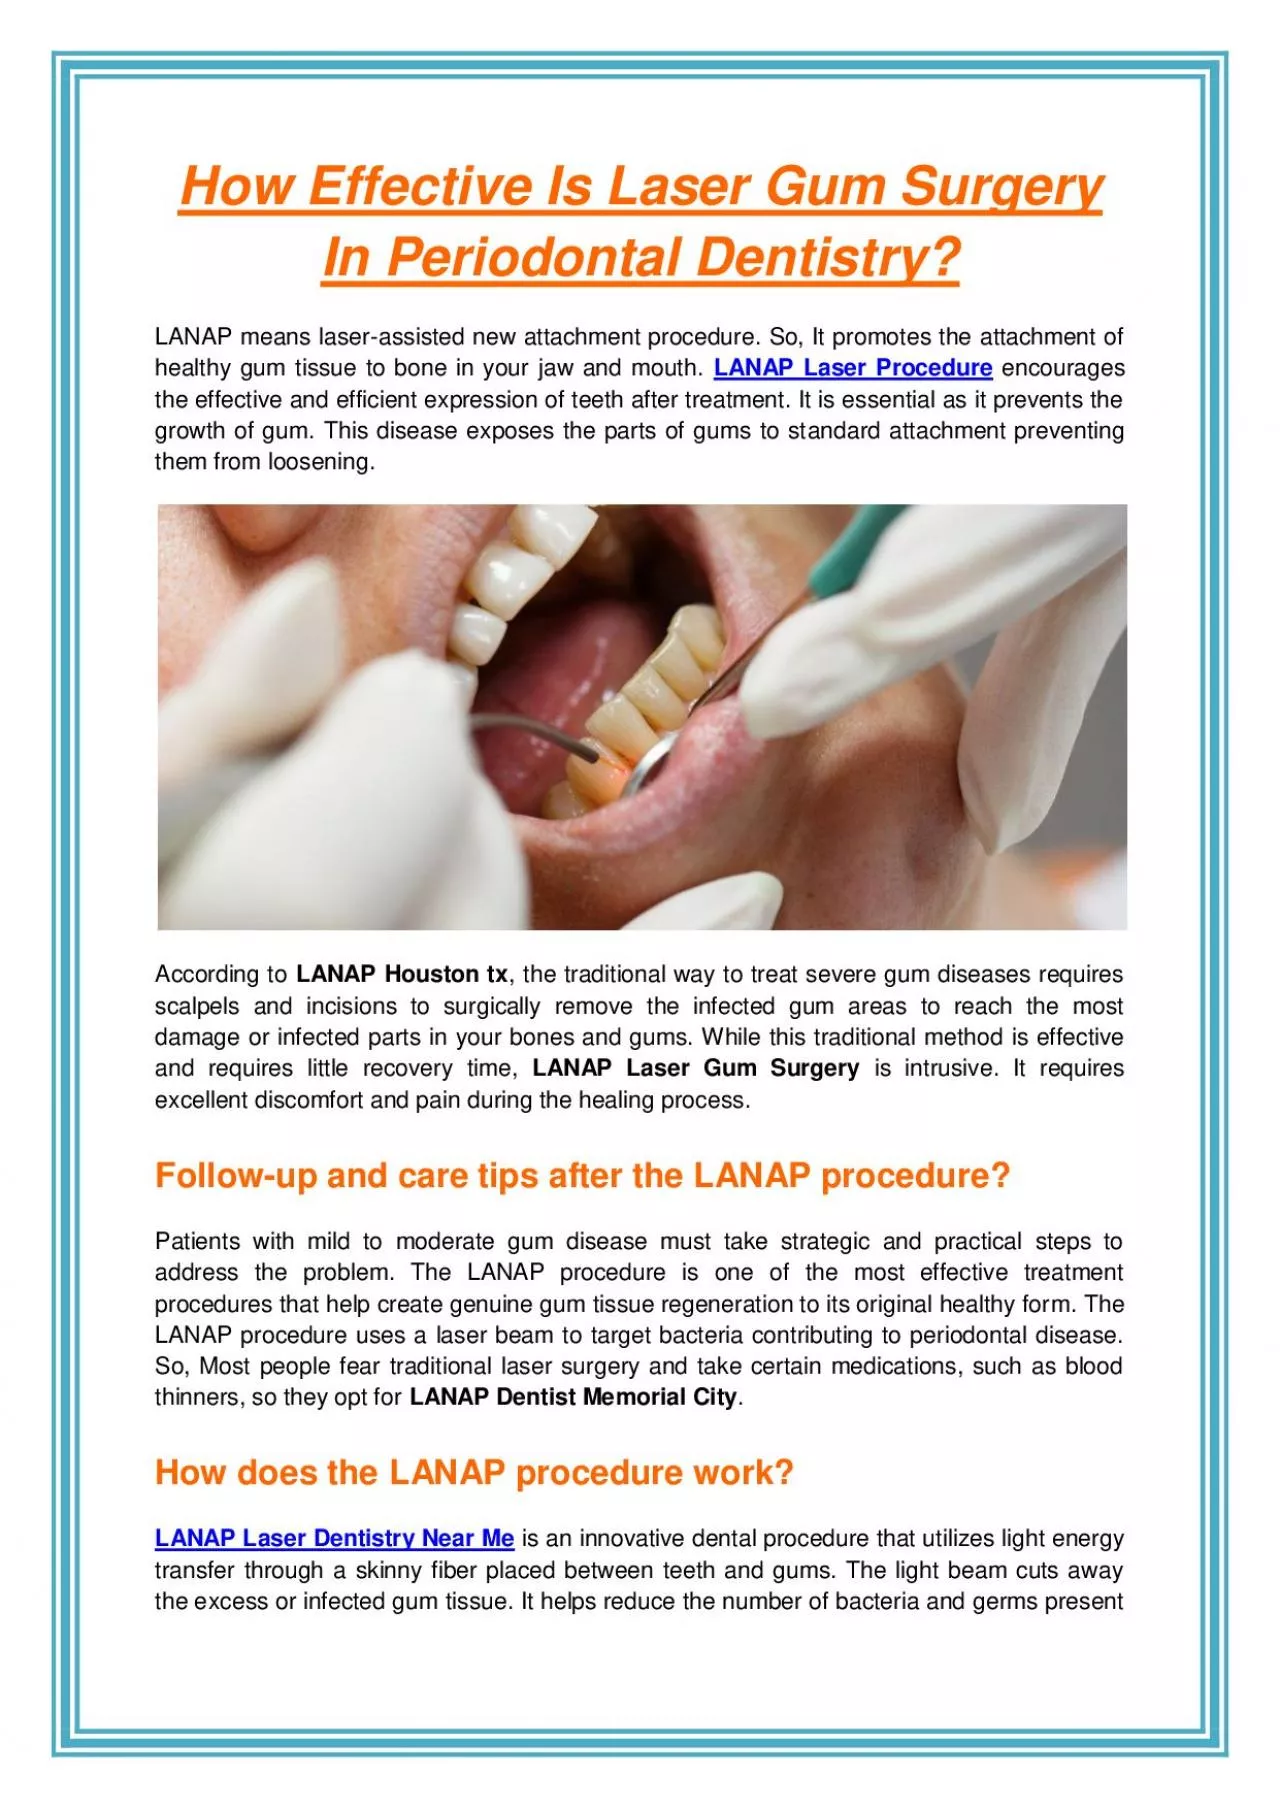 How Effective Is Laser Gum Surgery In Periodontal Dentistry?